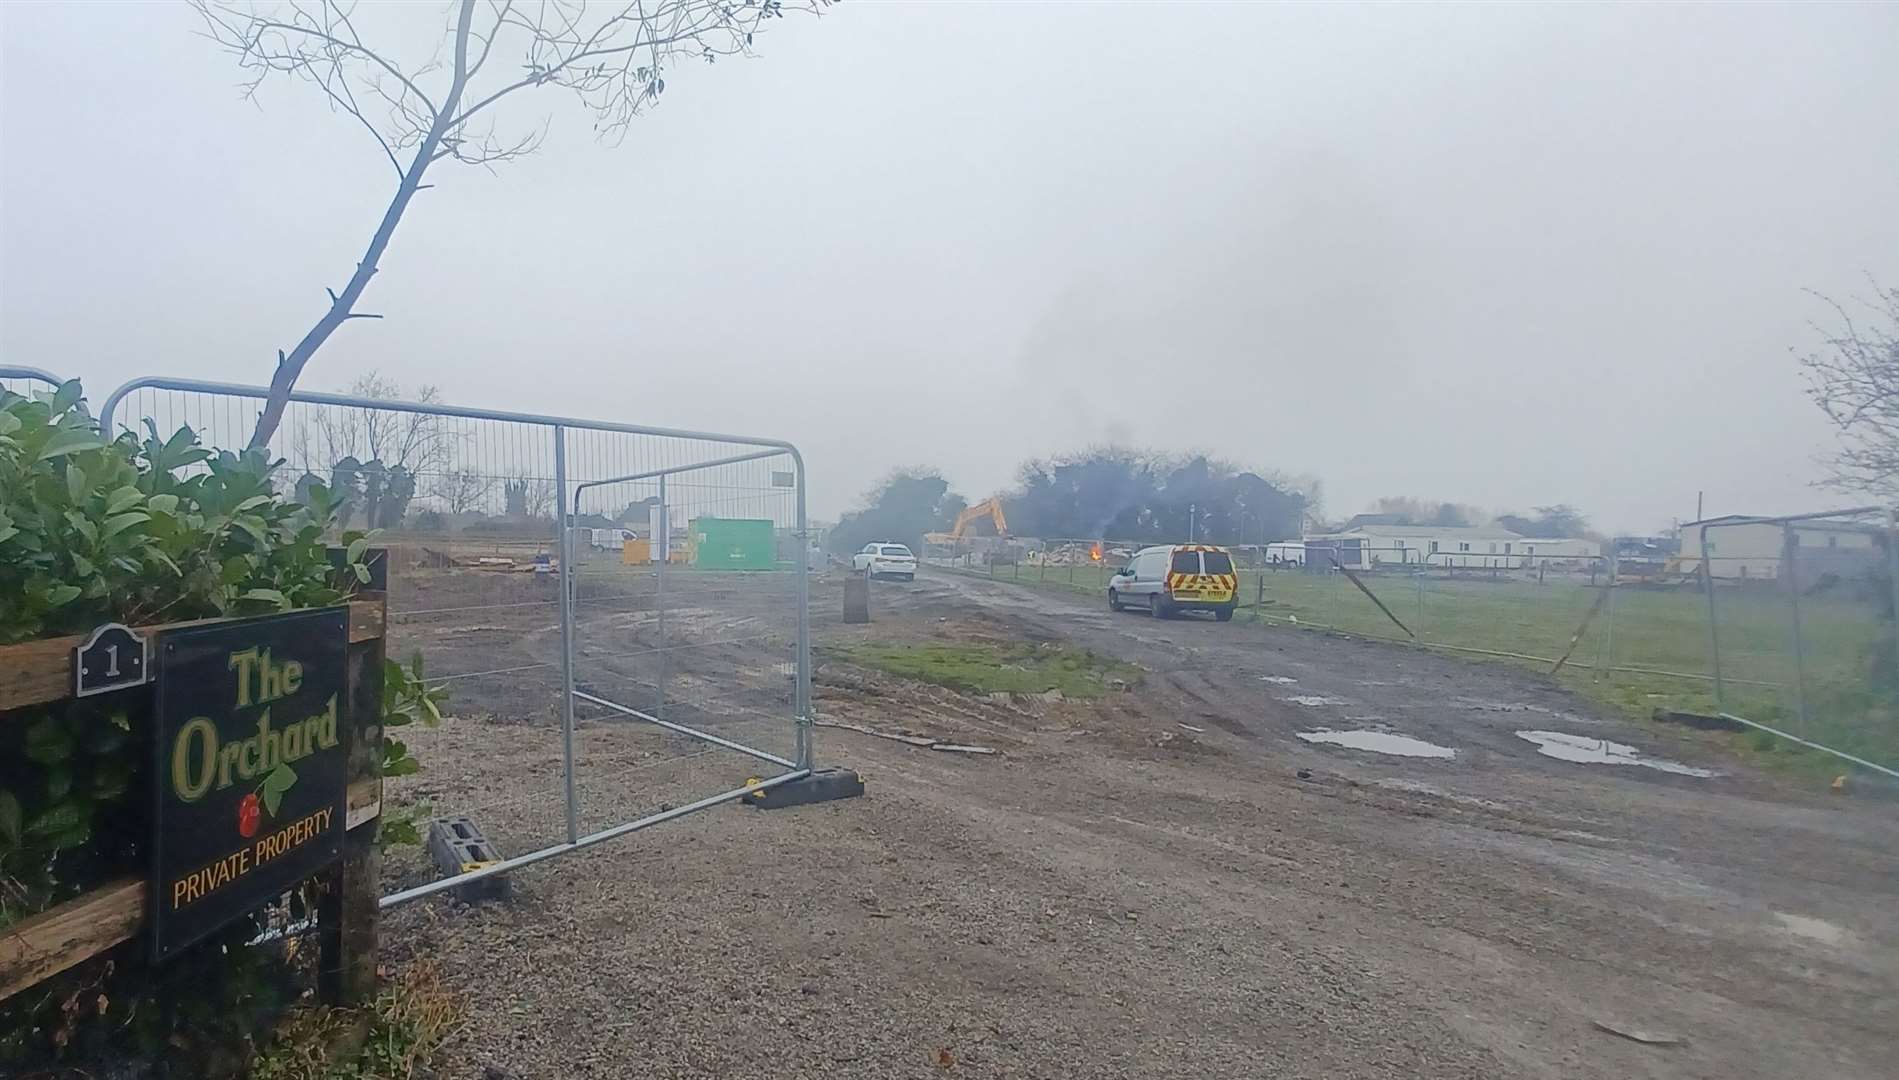 The traveller site now where excavators have been clearing the land